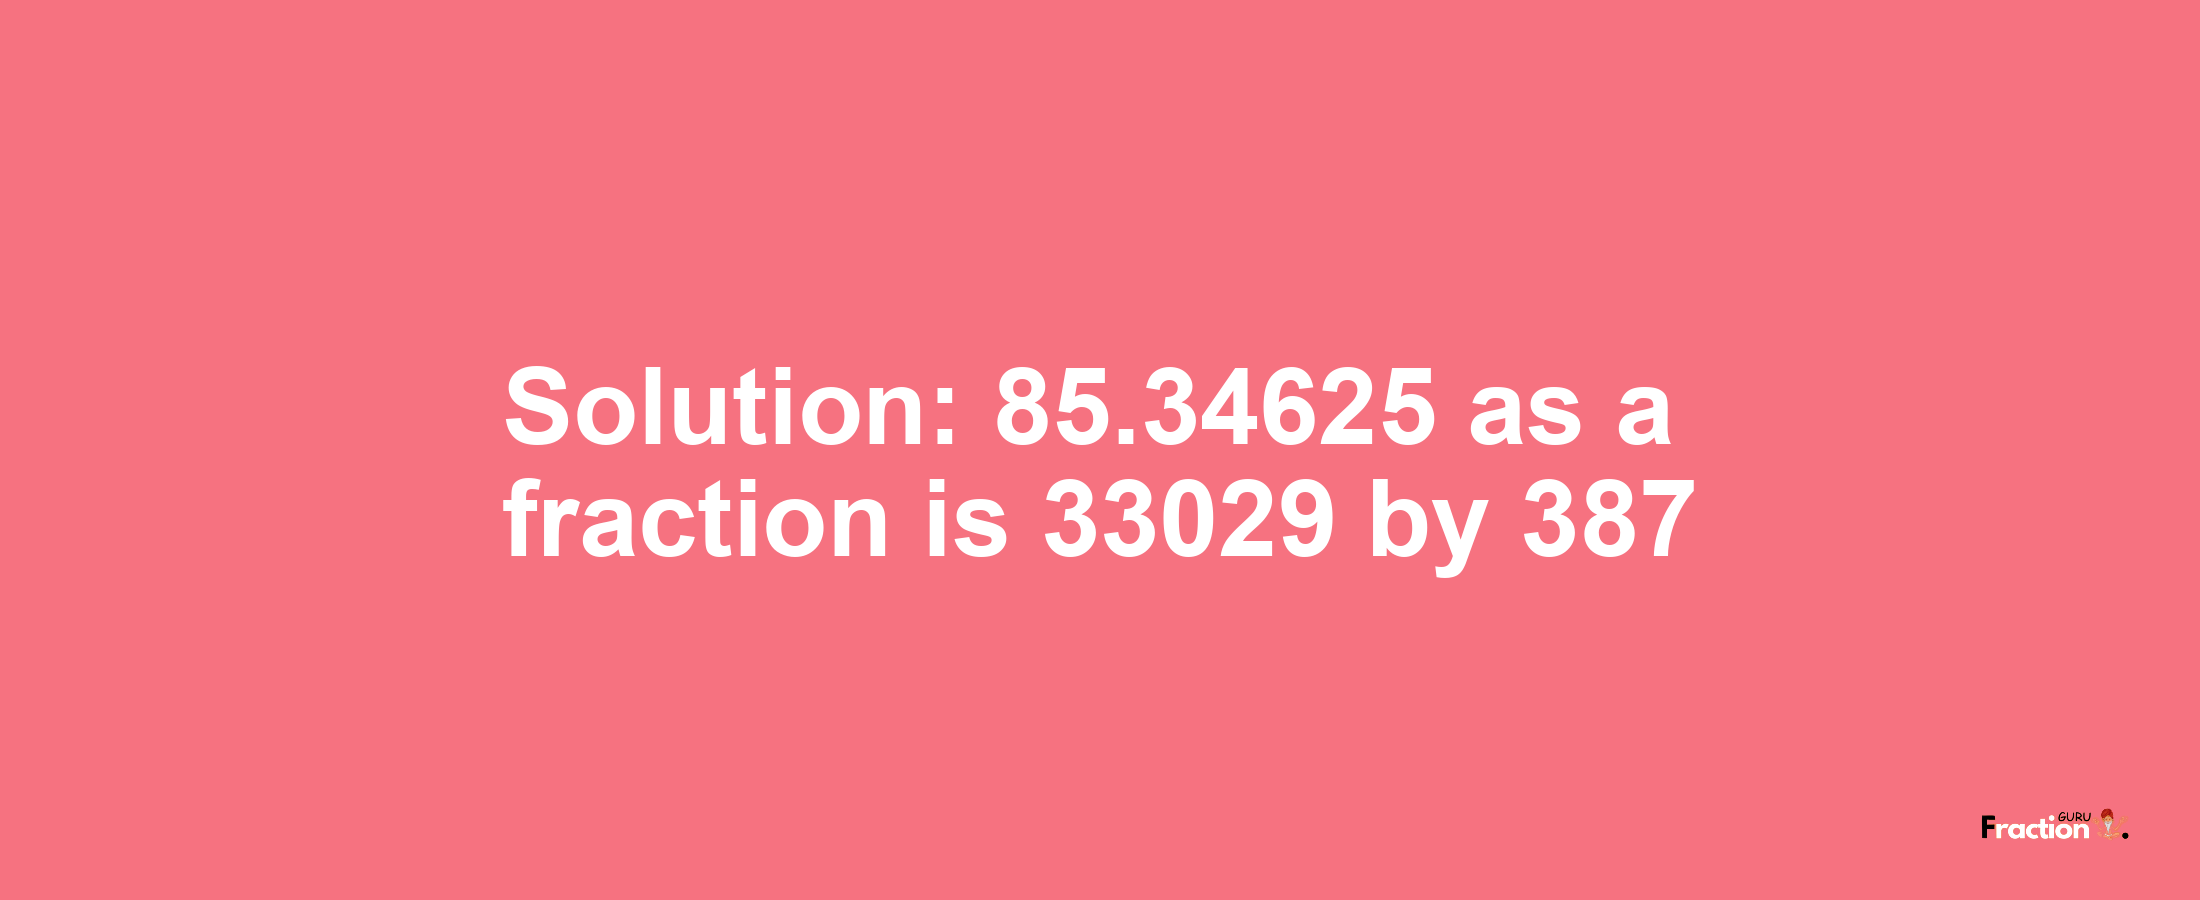 Solution:85.34625 as a fraction is 33029/387